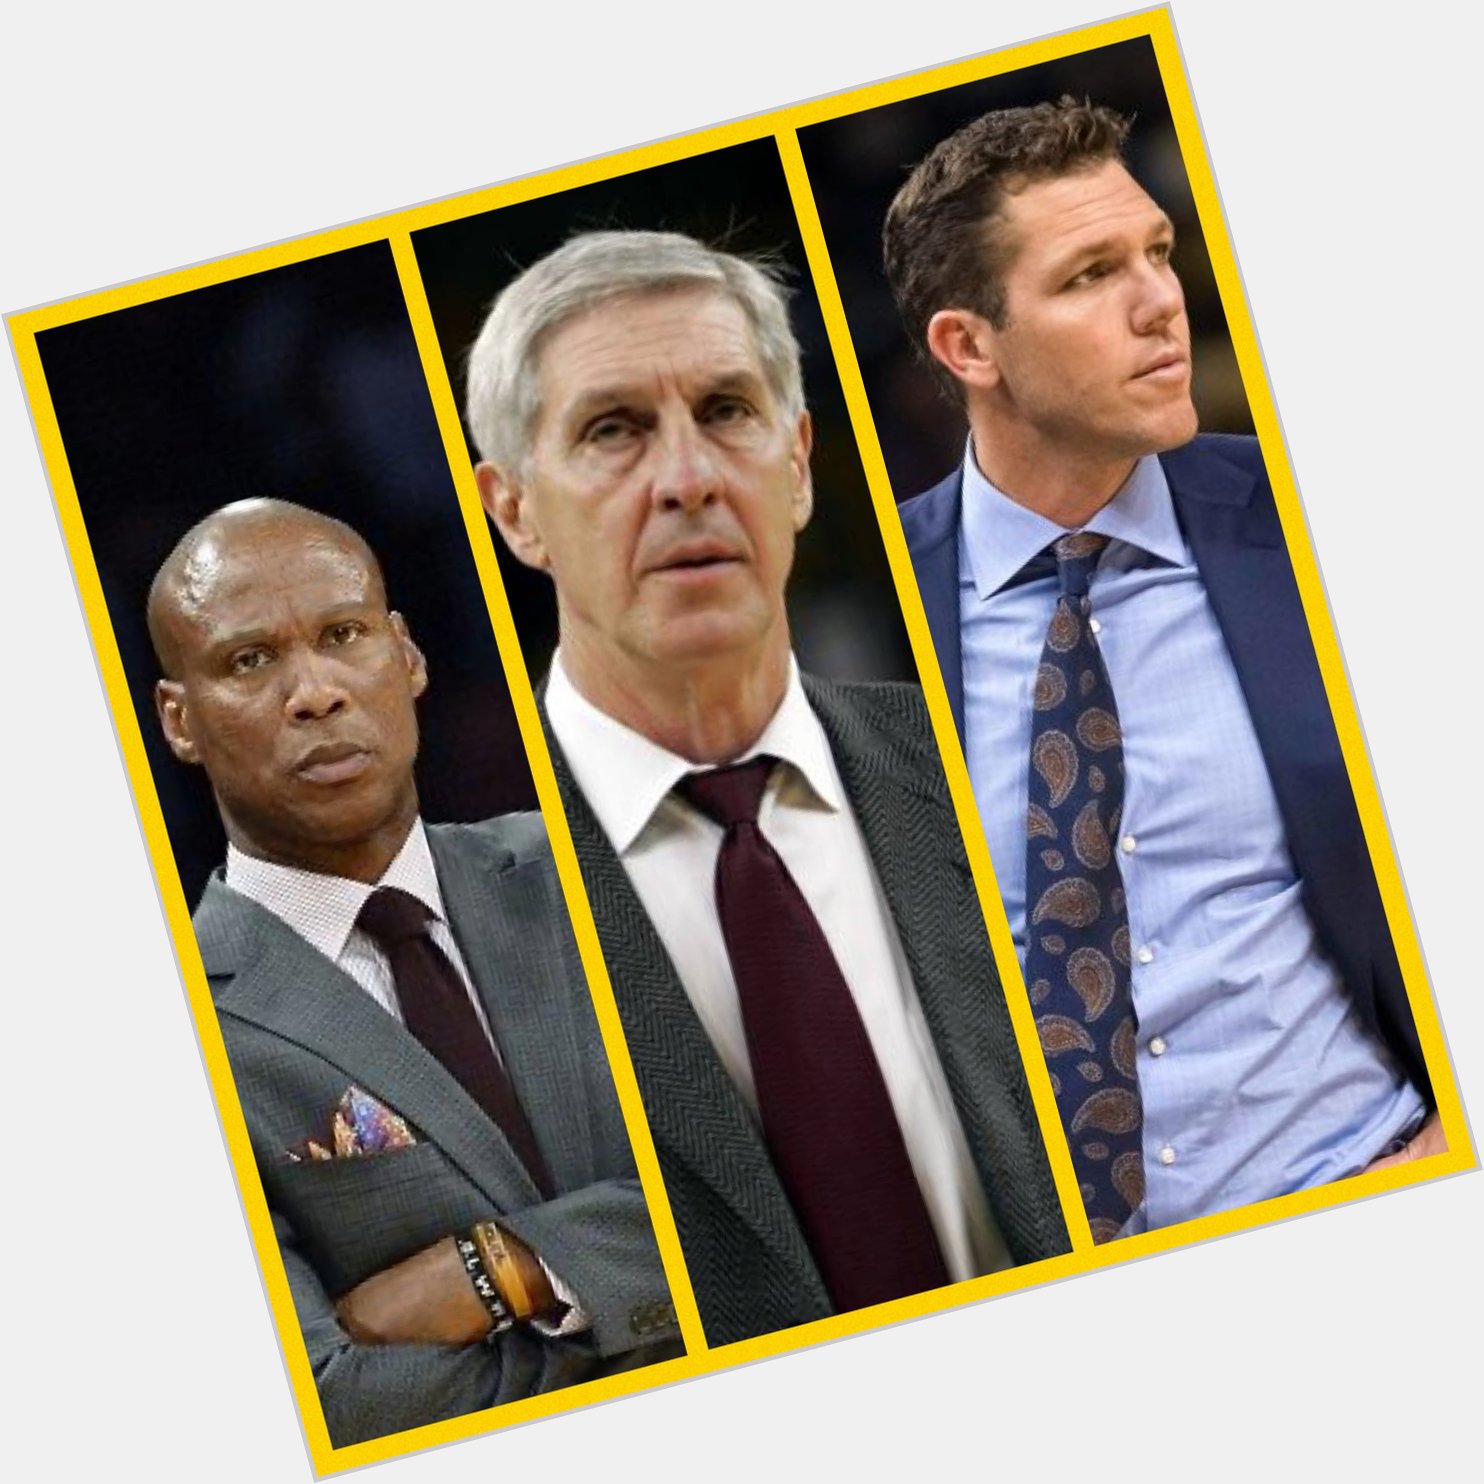 Happy Birthday Byron Scott, Jerry Sloan, and Luke Walton!

Draft One, Trade One, Cut One of these coaches! 